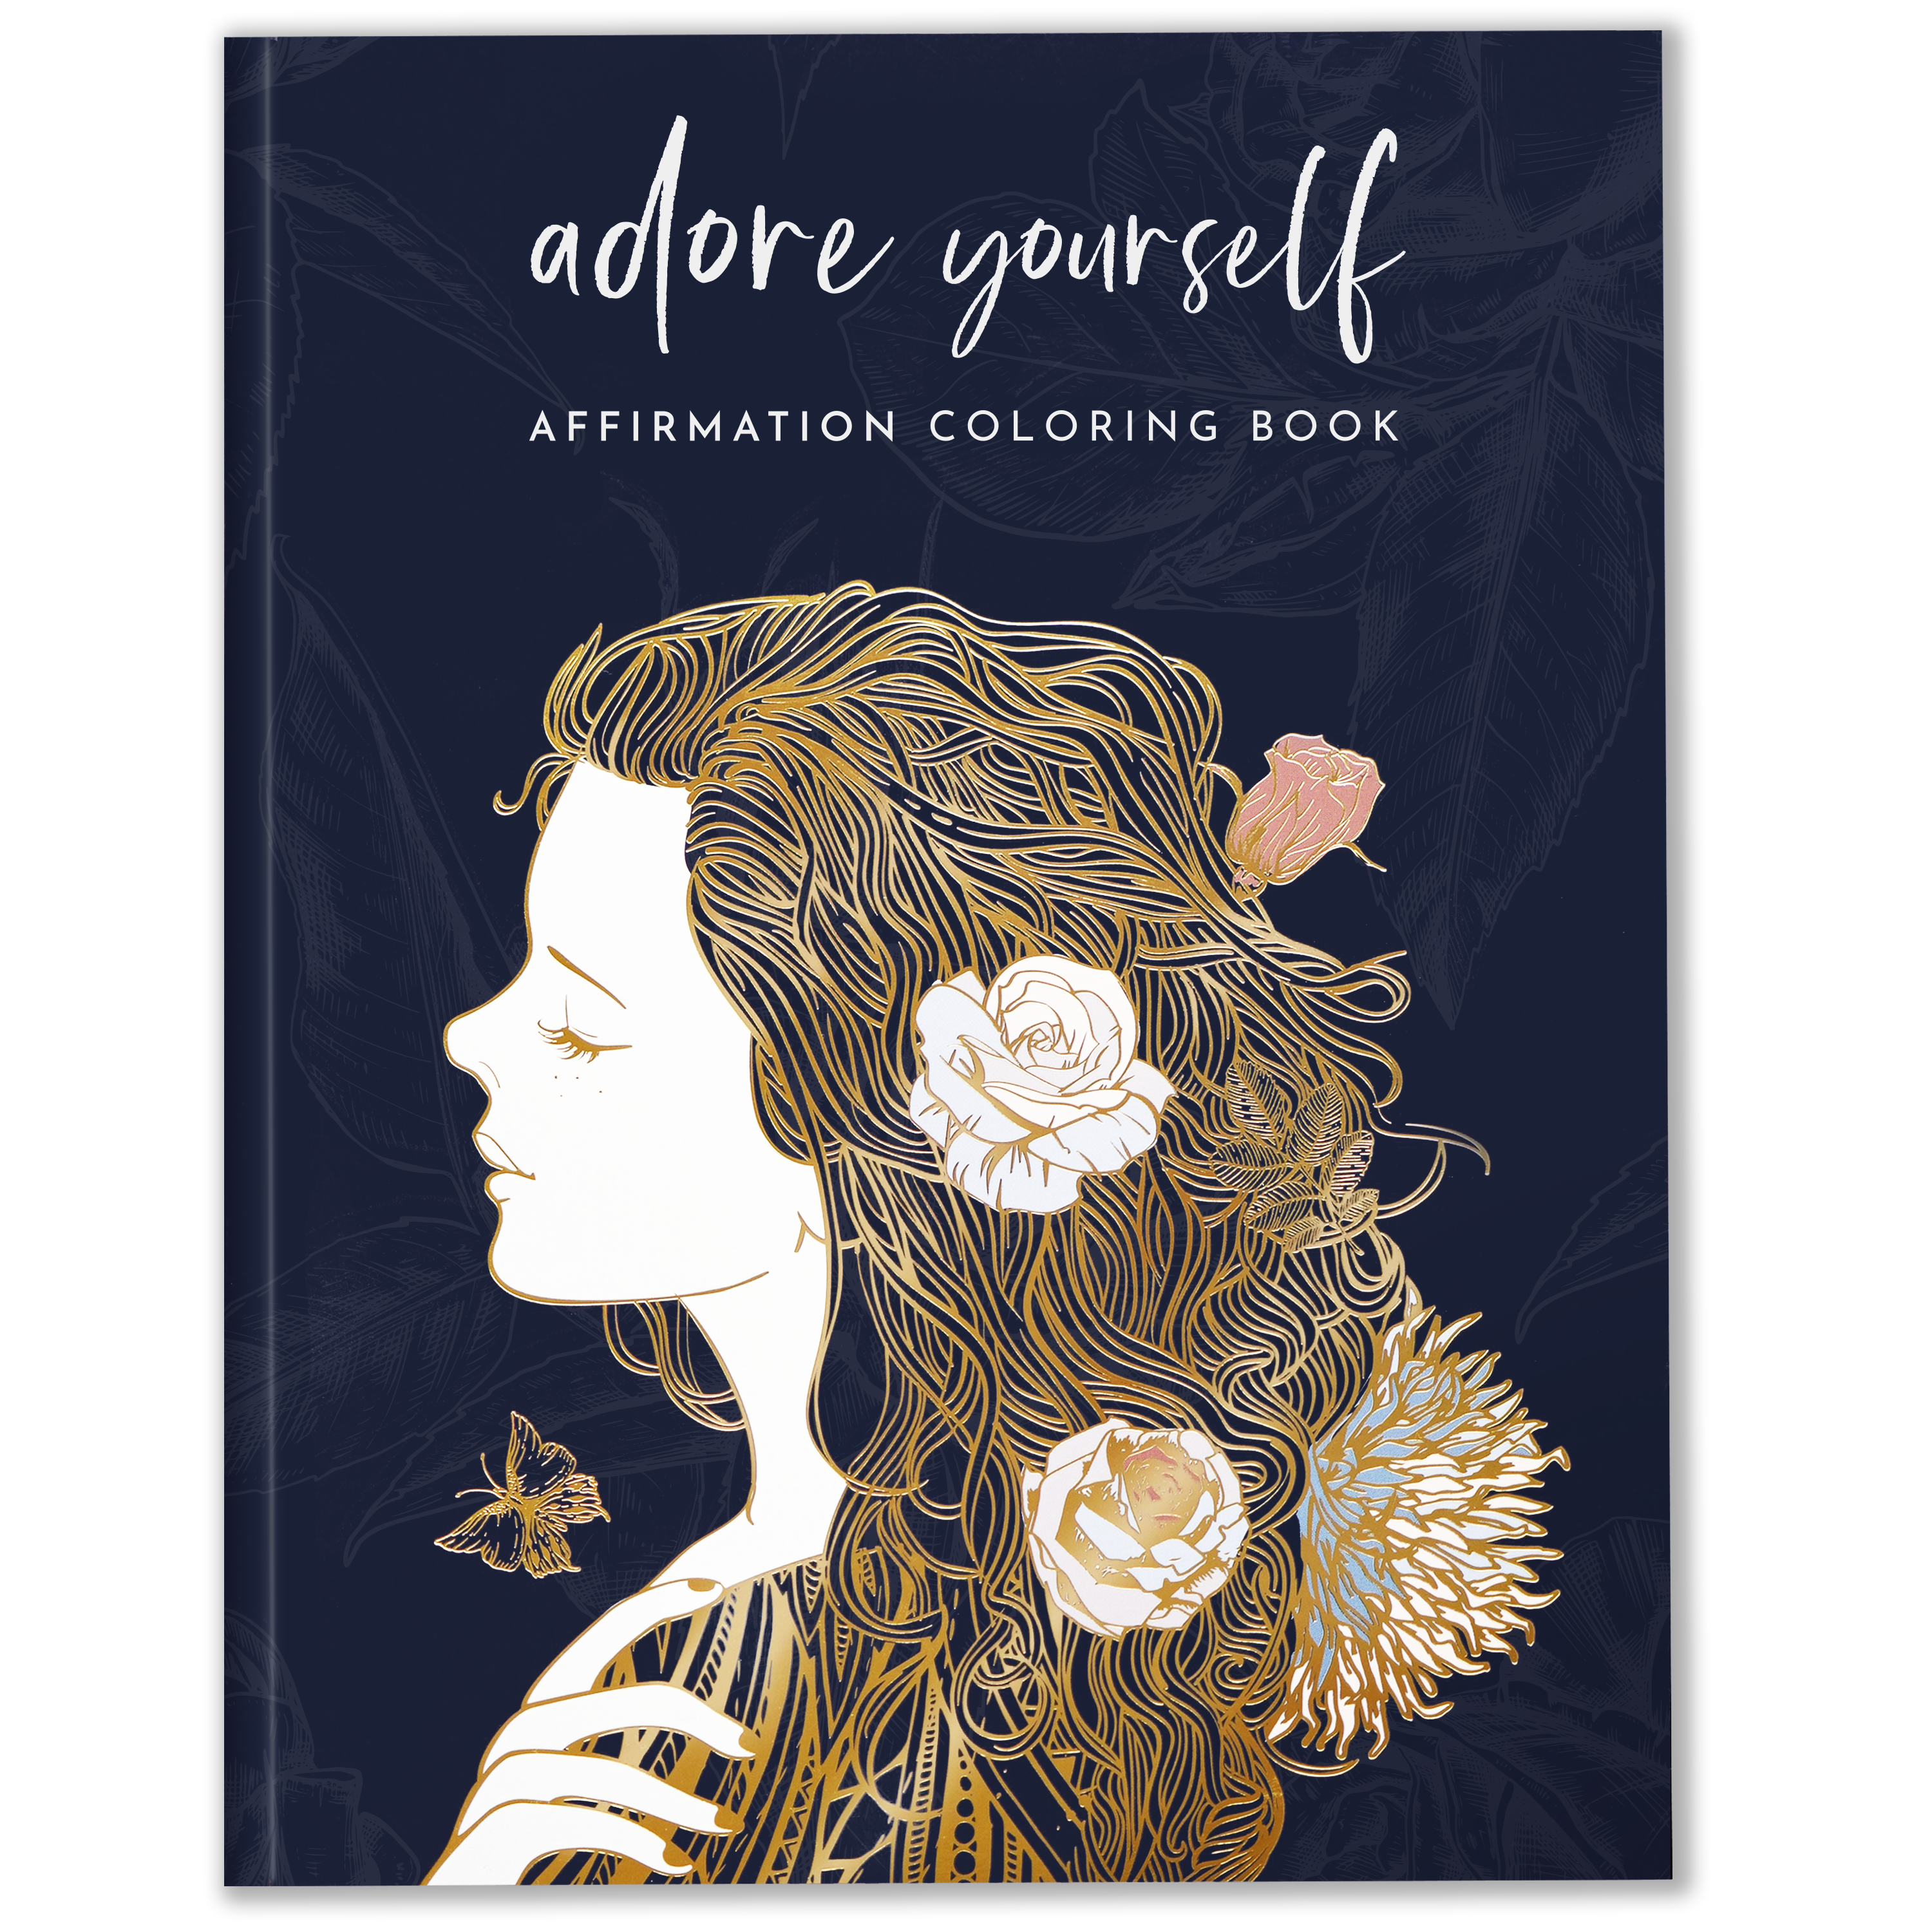 Coloring Journals for Grownups - Creativity Meditation for Growth